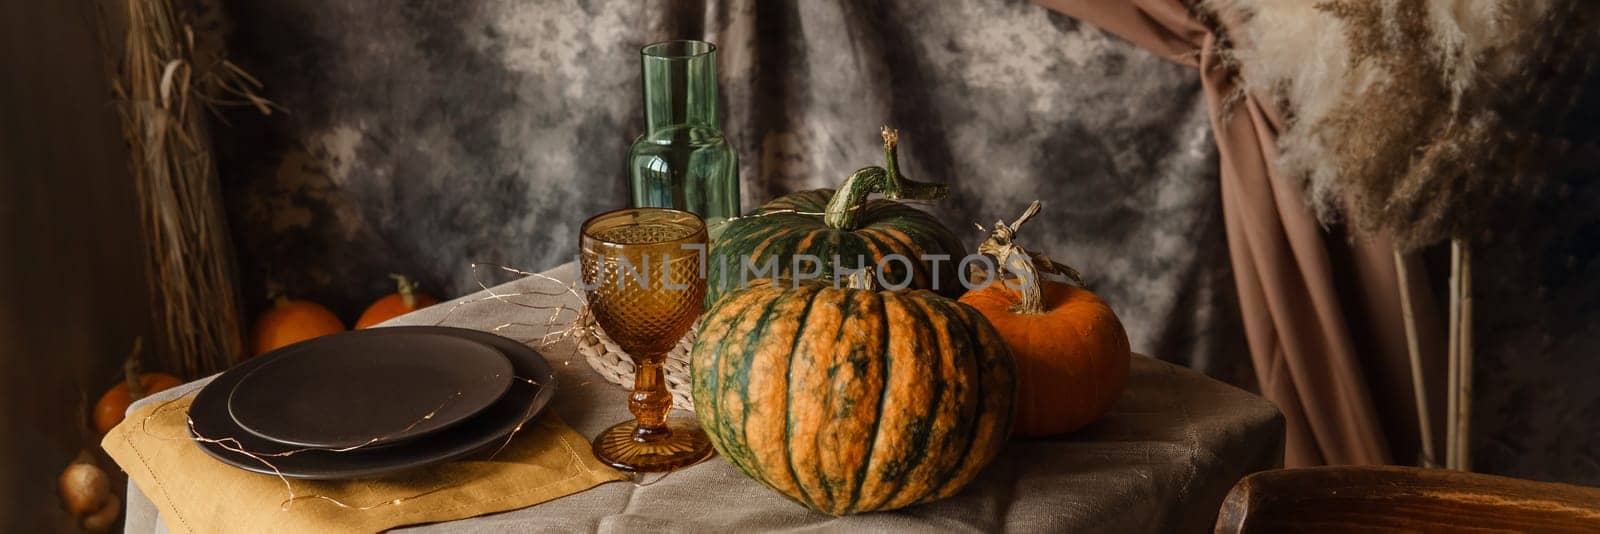 Autumn interior: a table covered with dishes, pumpkins, chair, casual arrangement of Japanese pampas grass. Interior in the photo Studio. by Annu1tochka